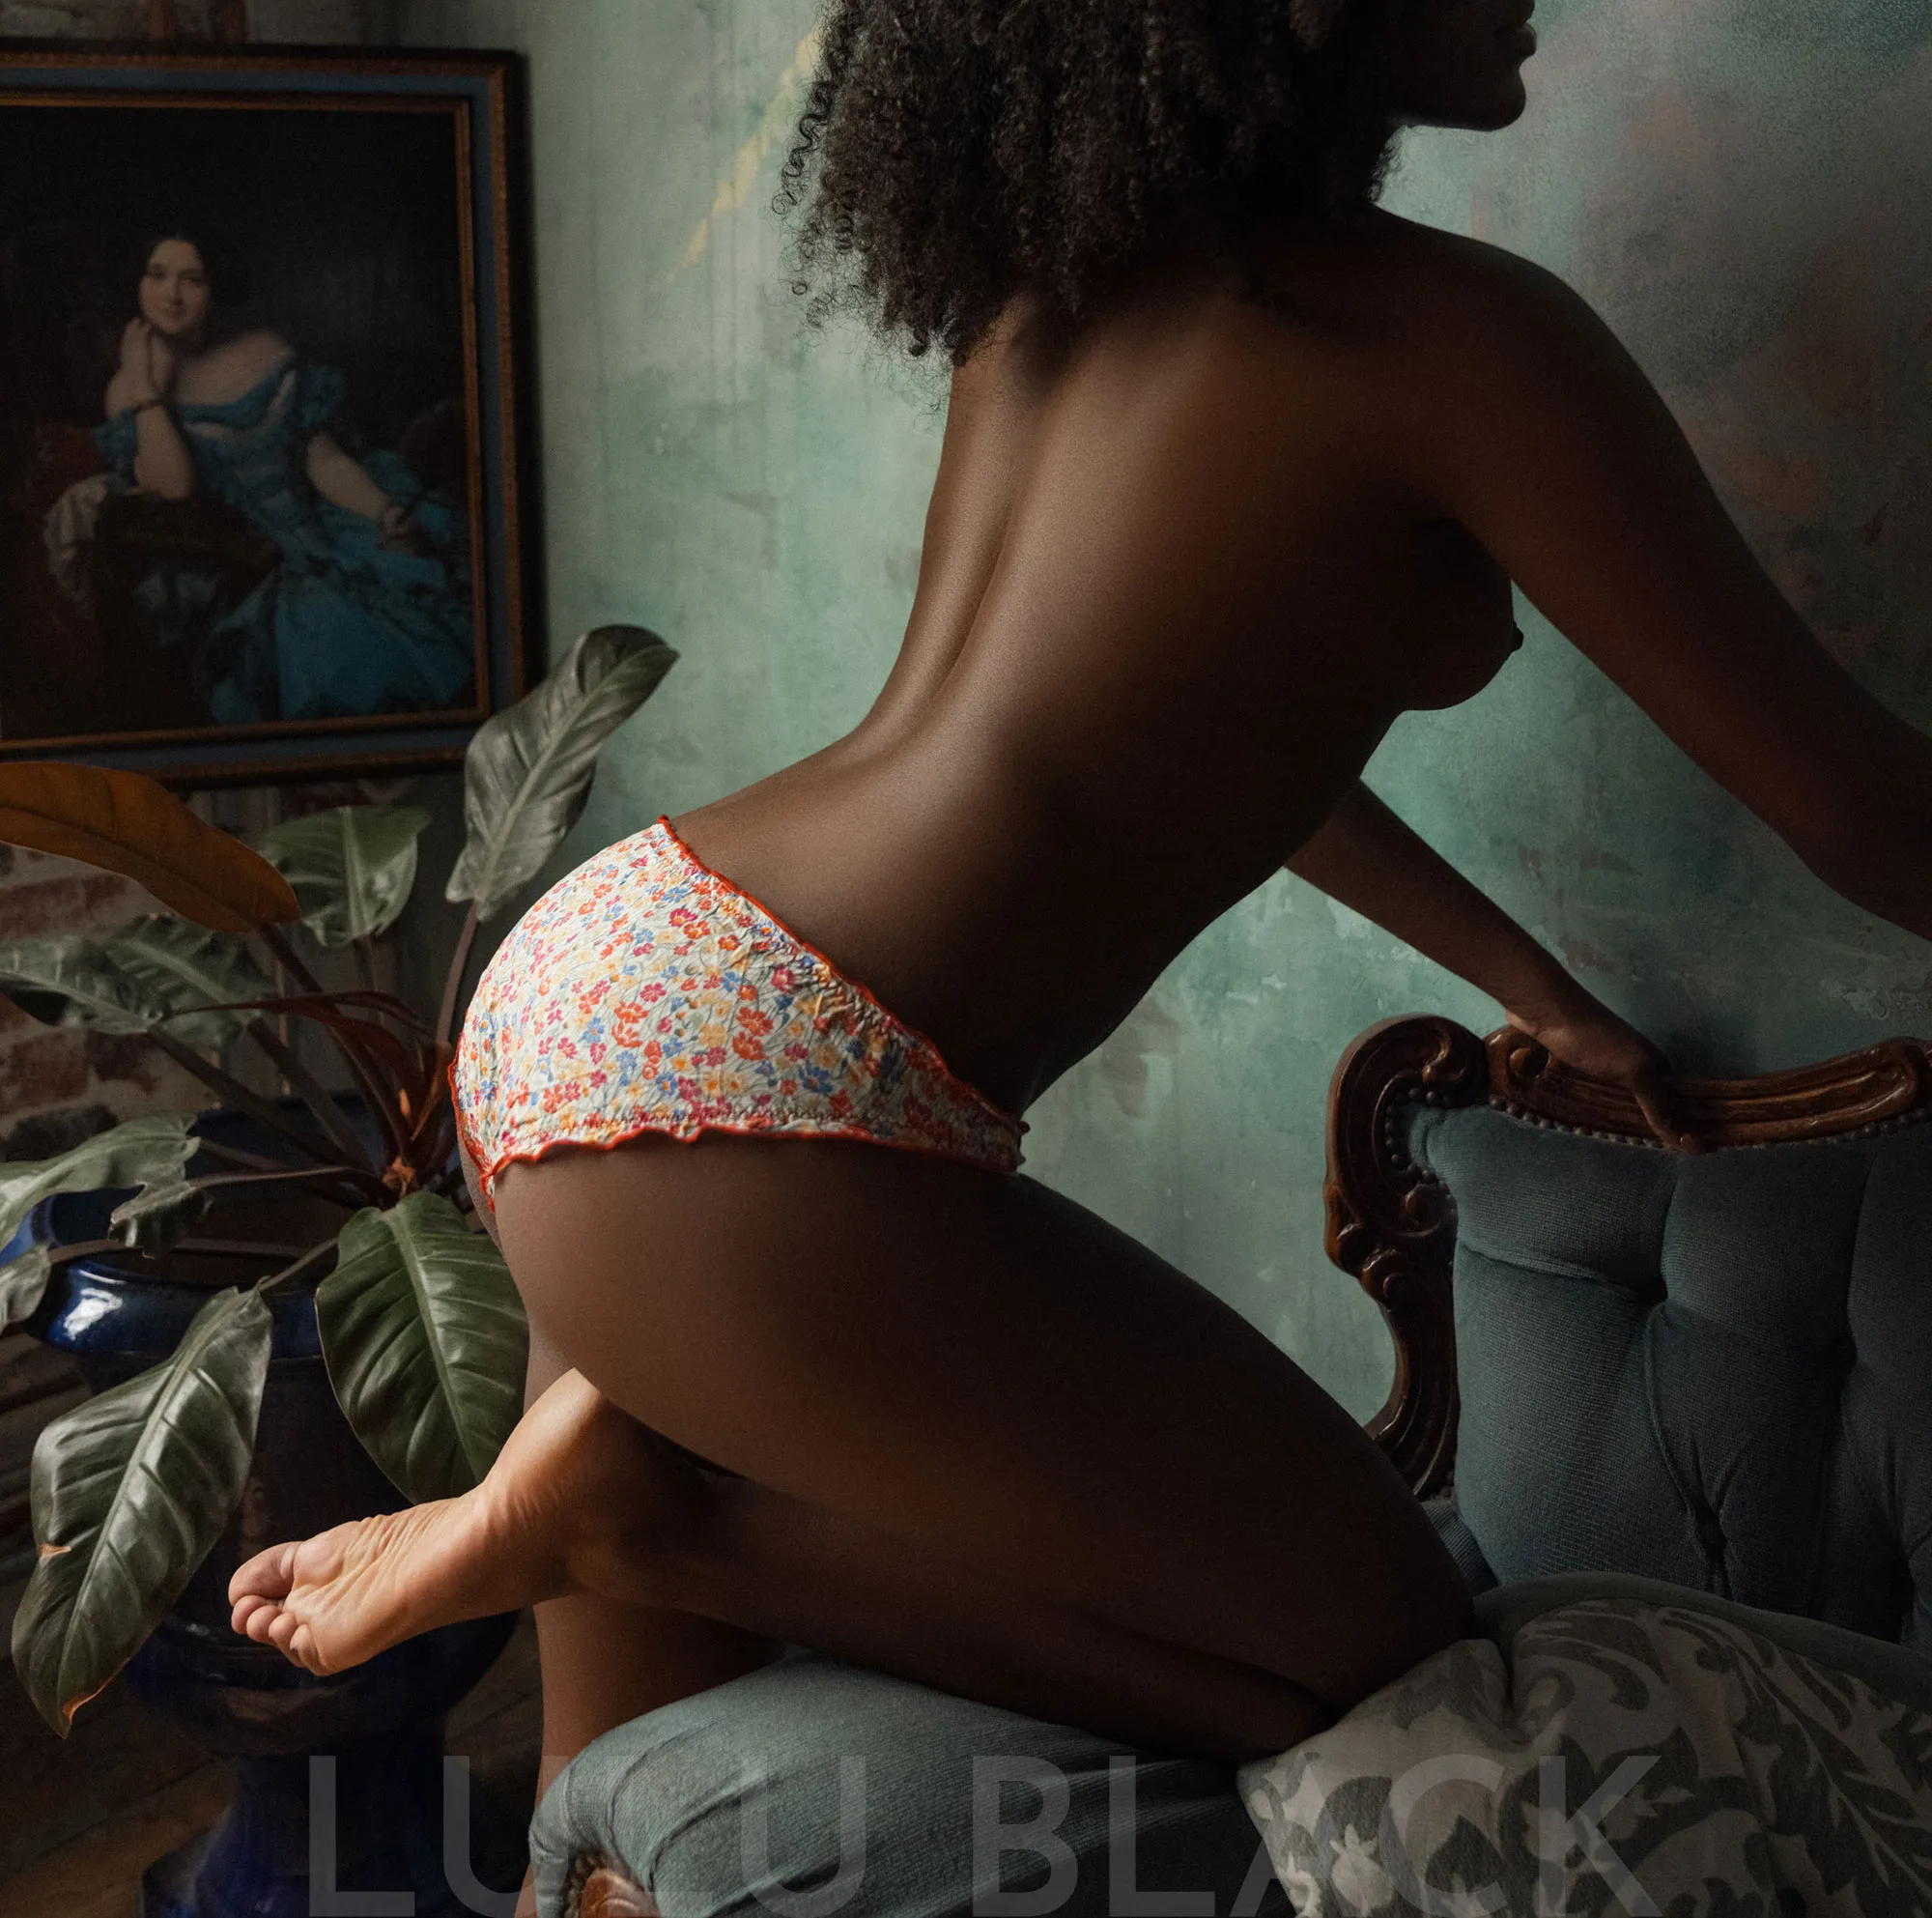 Bottoms up! Naomi looking cute in flowery knickers, showing off her smooth ebony skin tone.